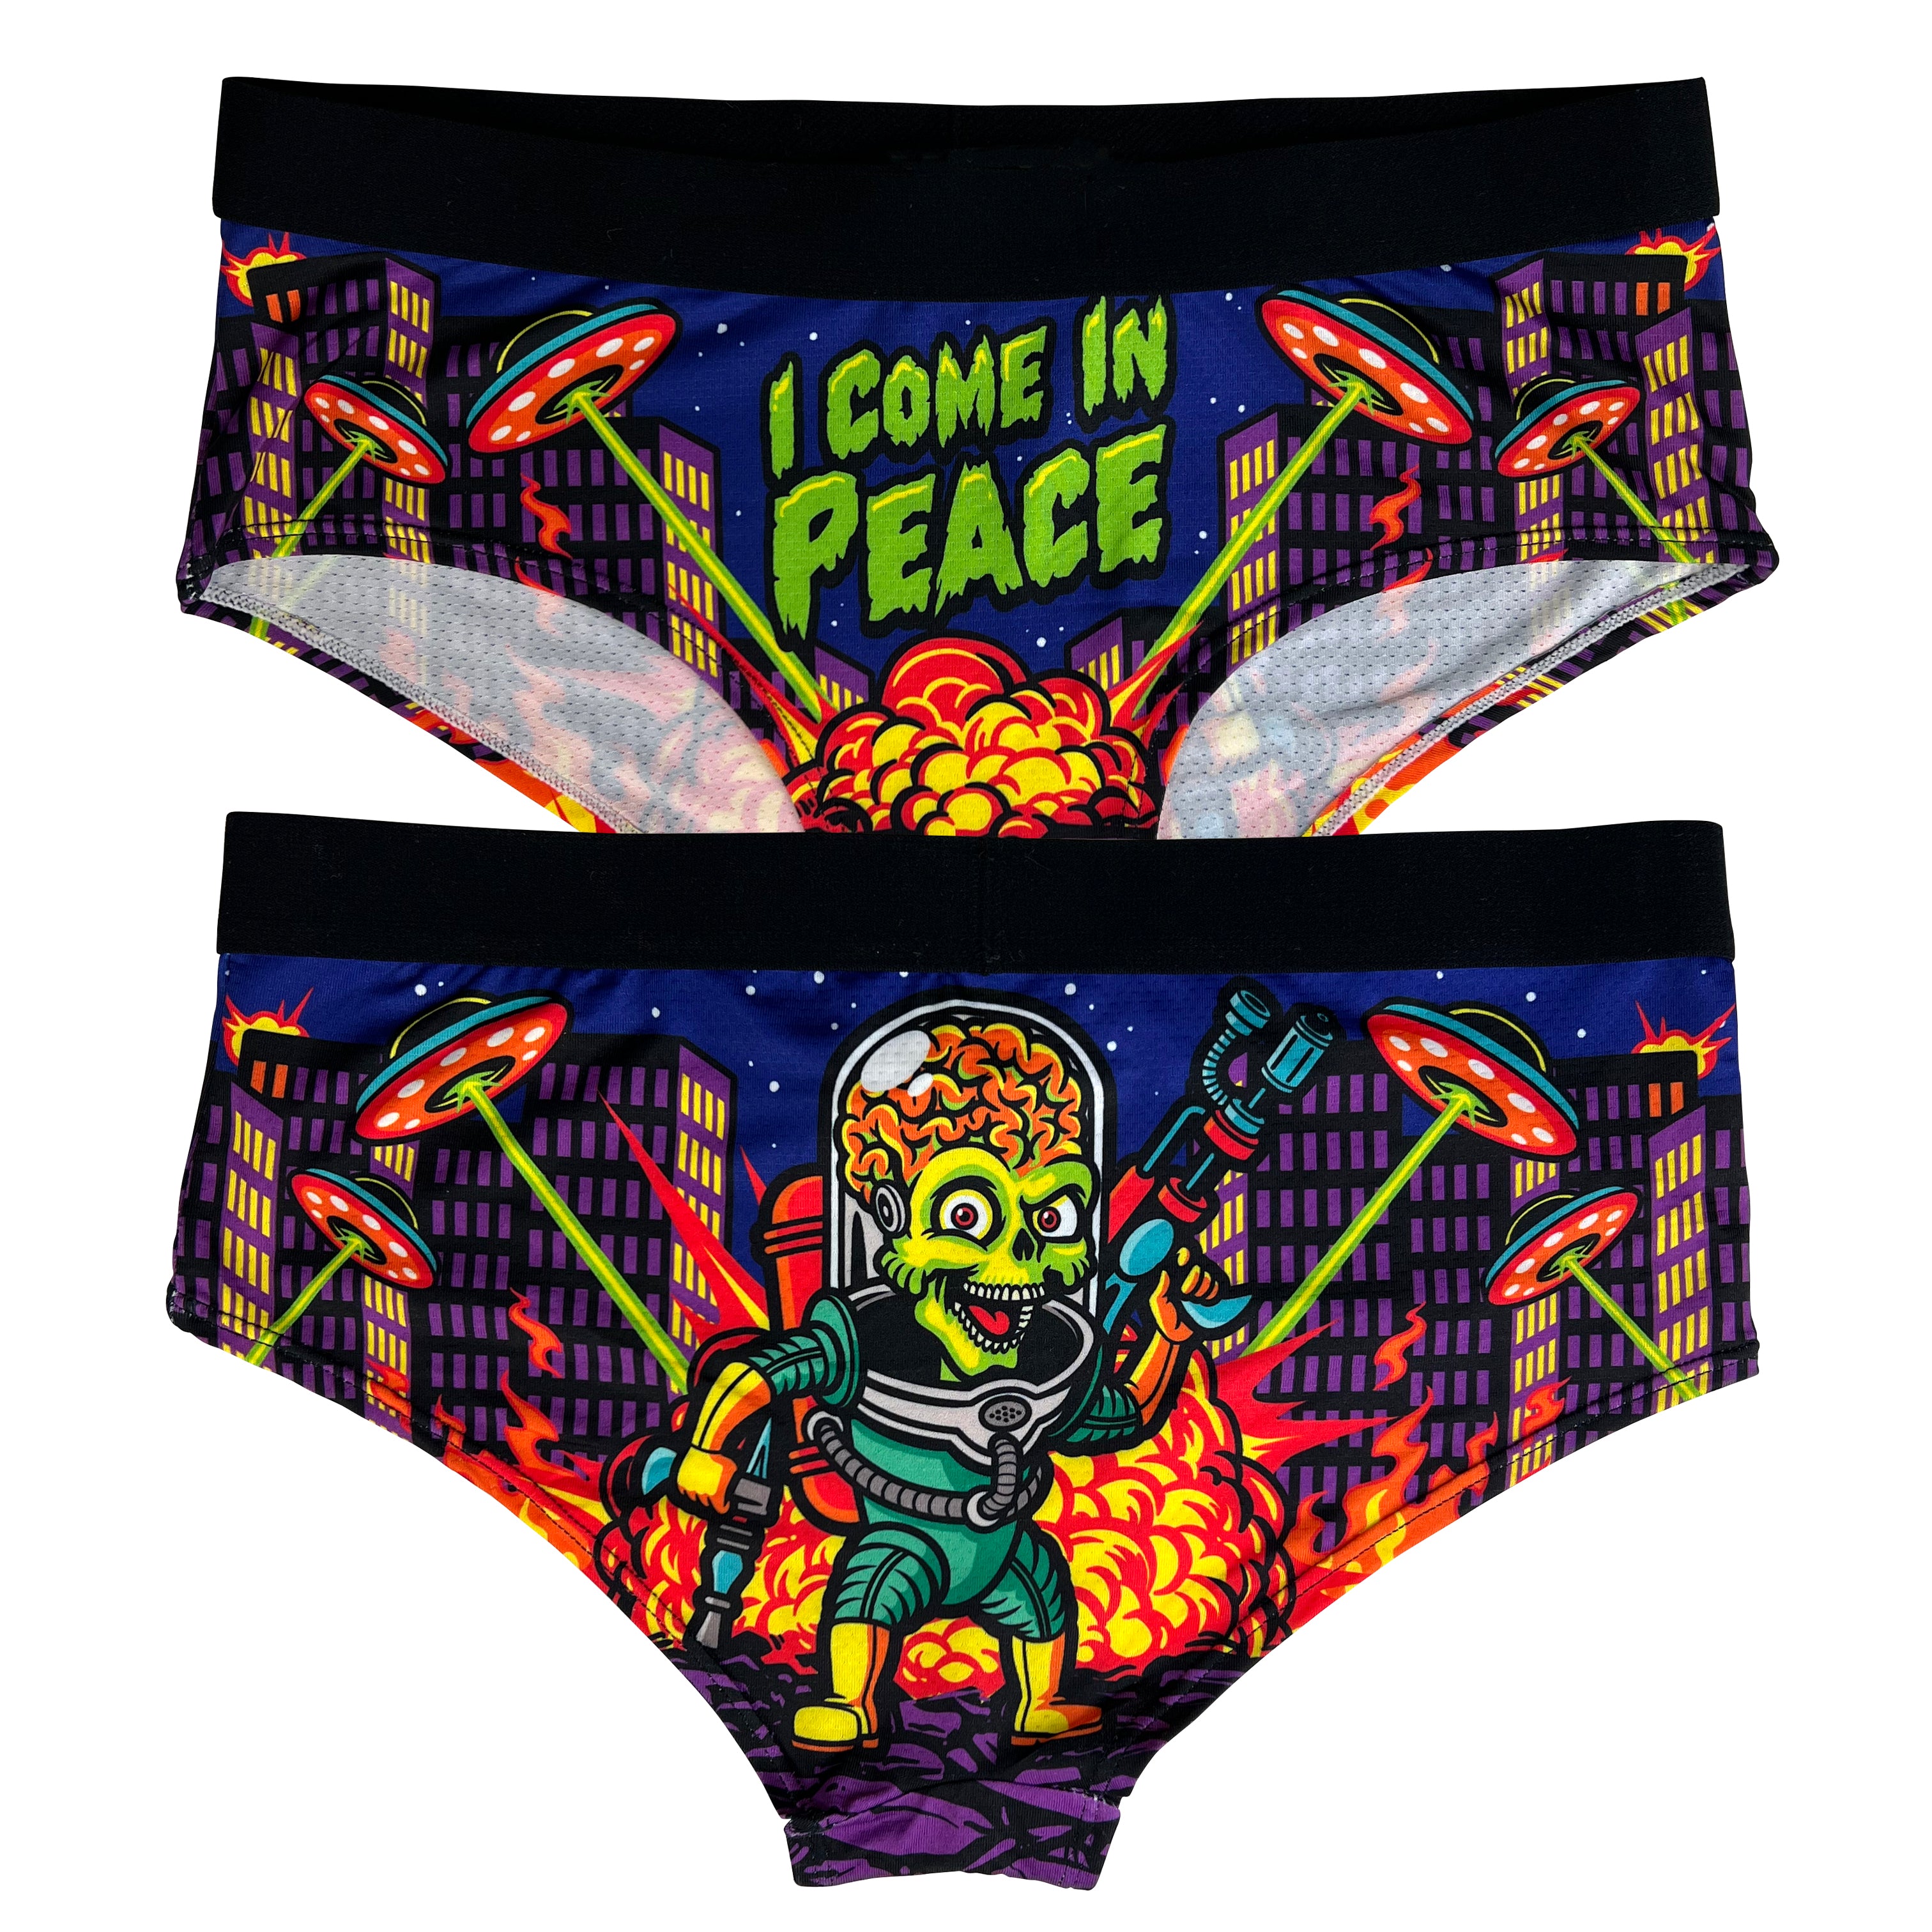 I Come In Peace panties – Harebrained